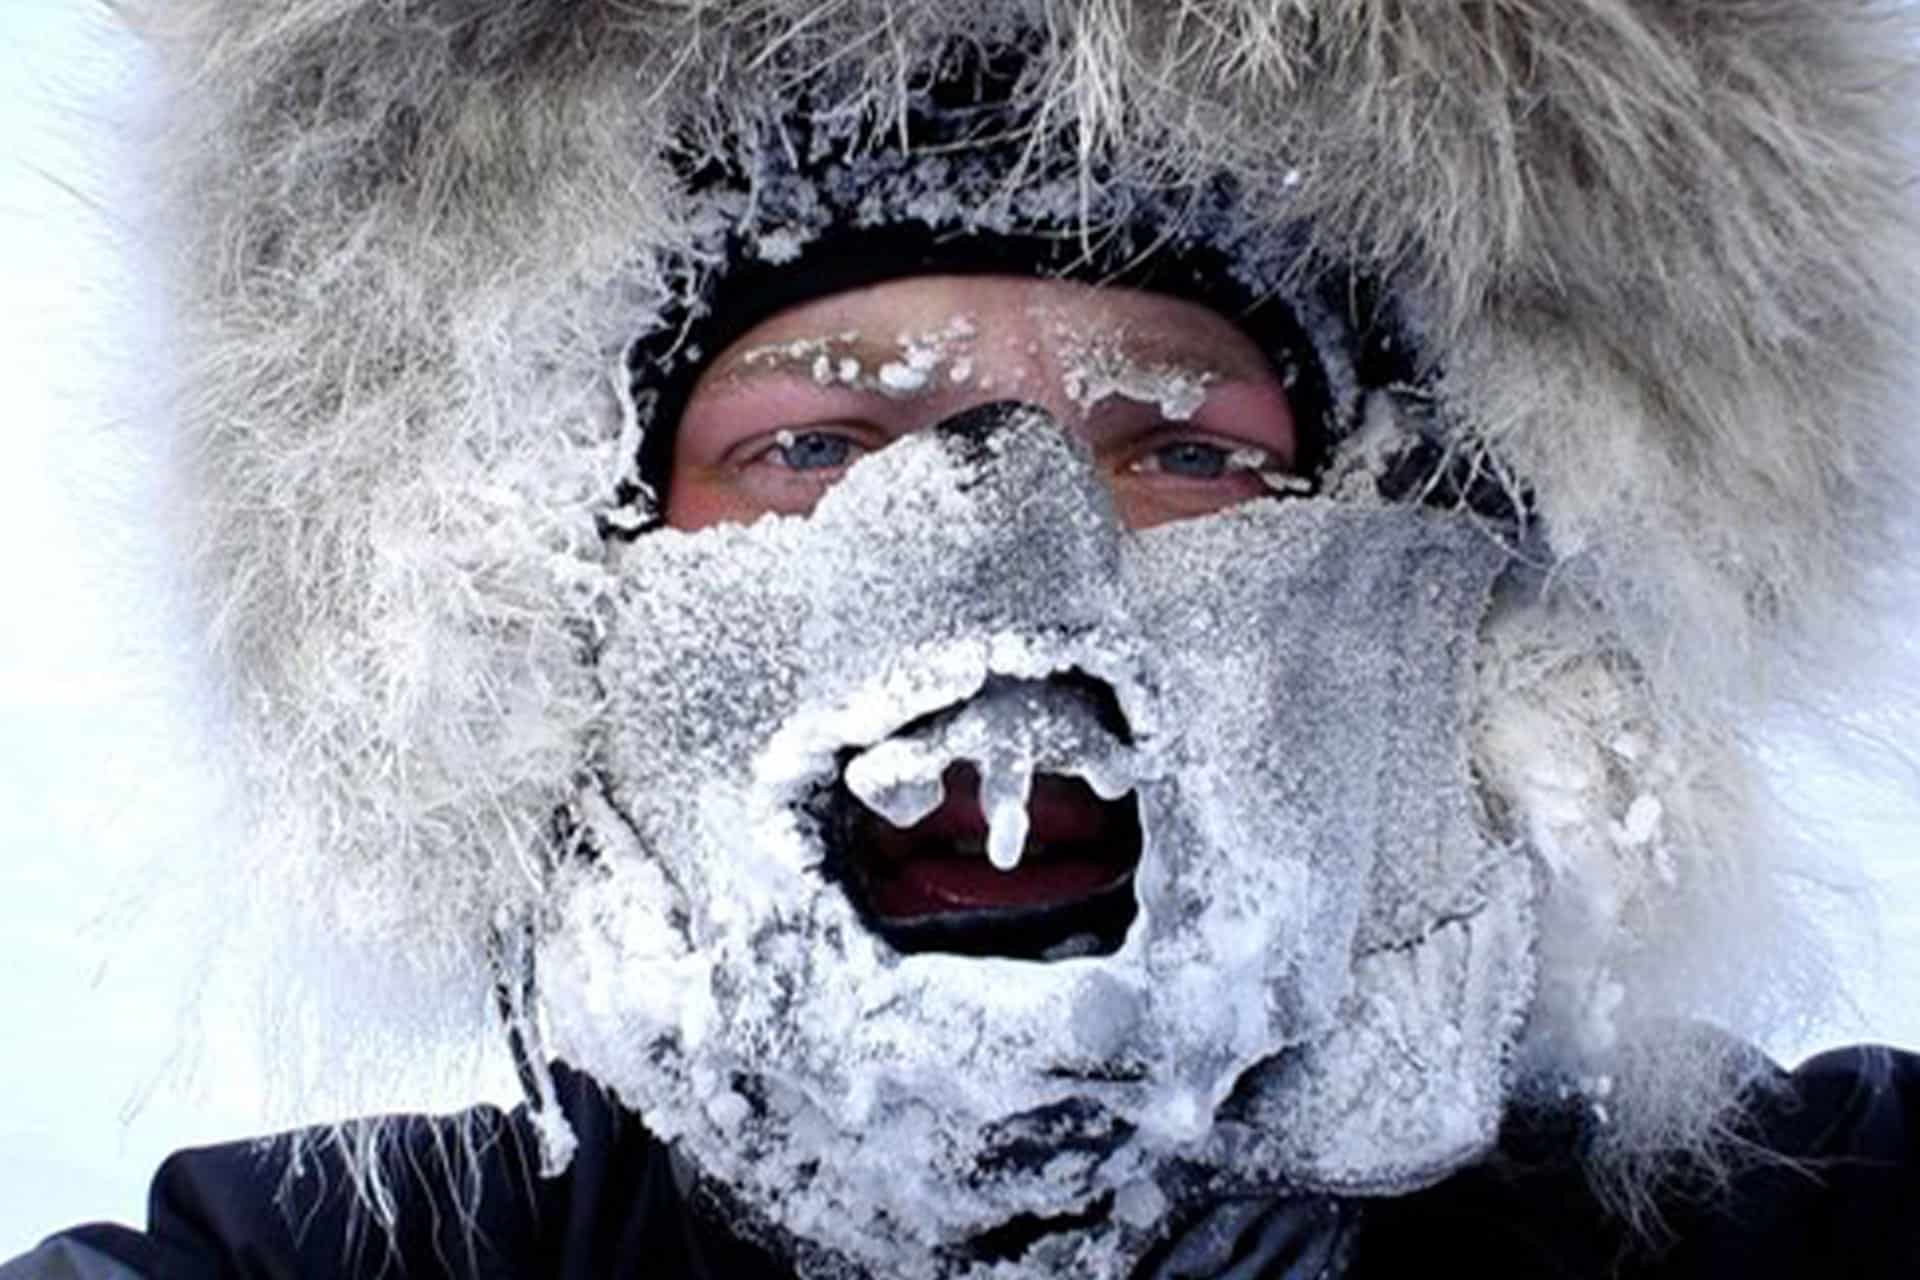 Ben Saunders covered in ice during an expedition in Antarctica.